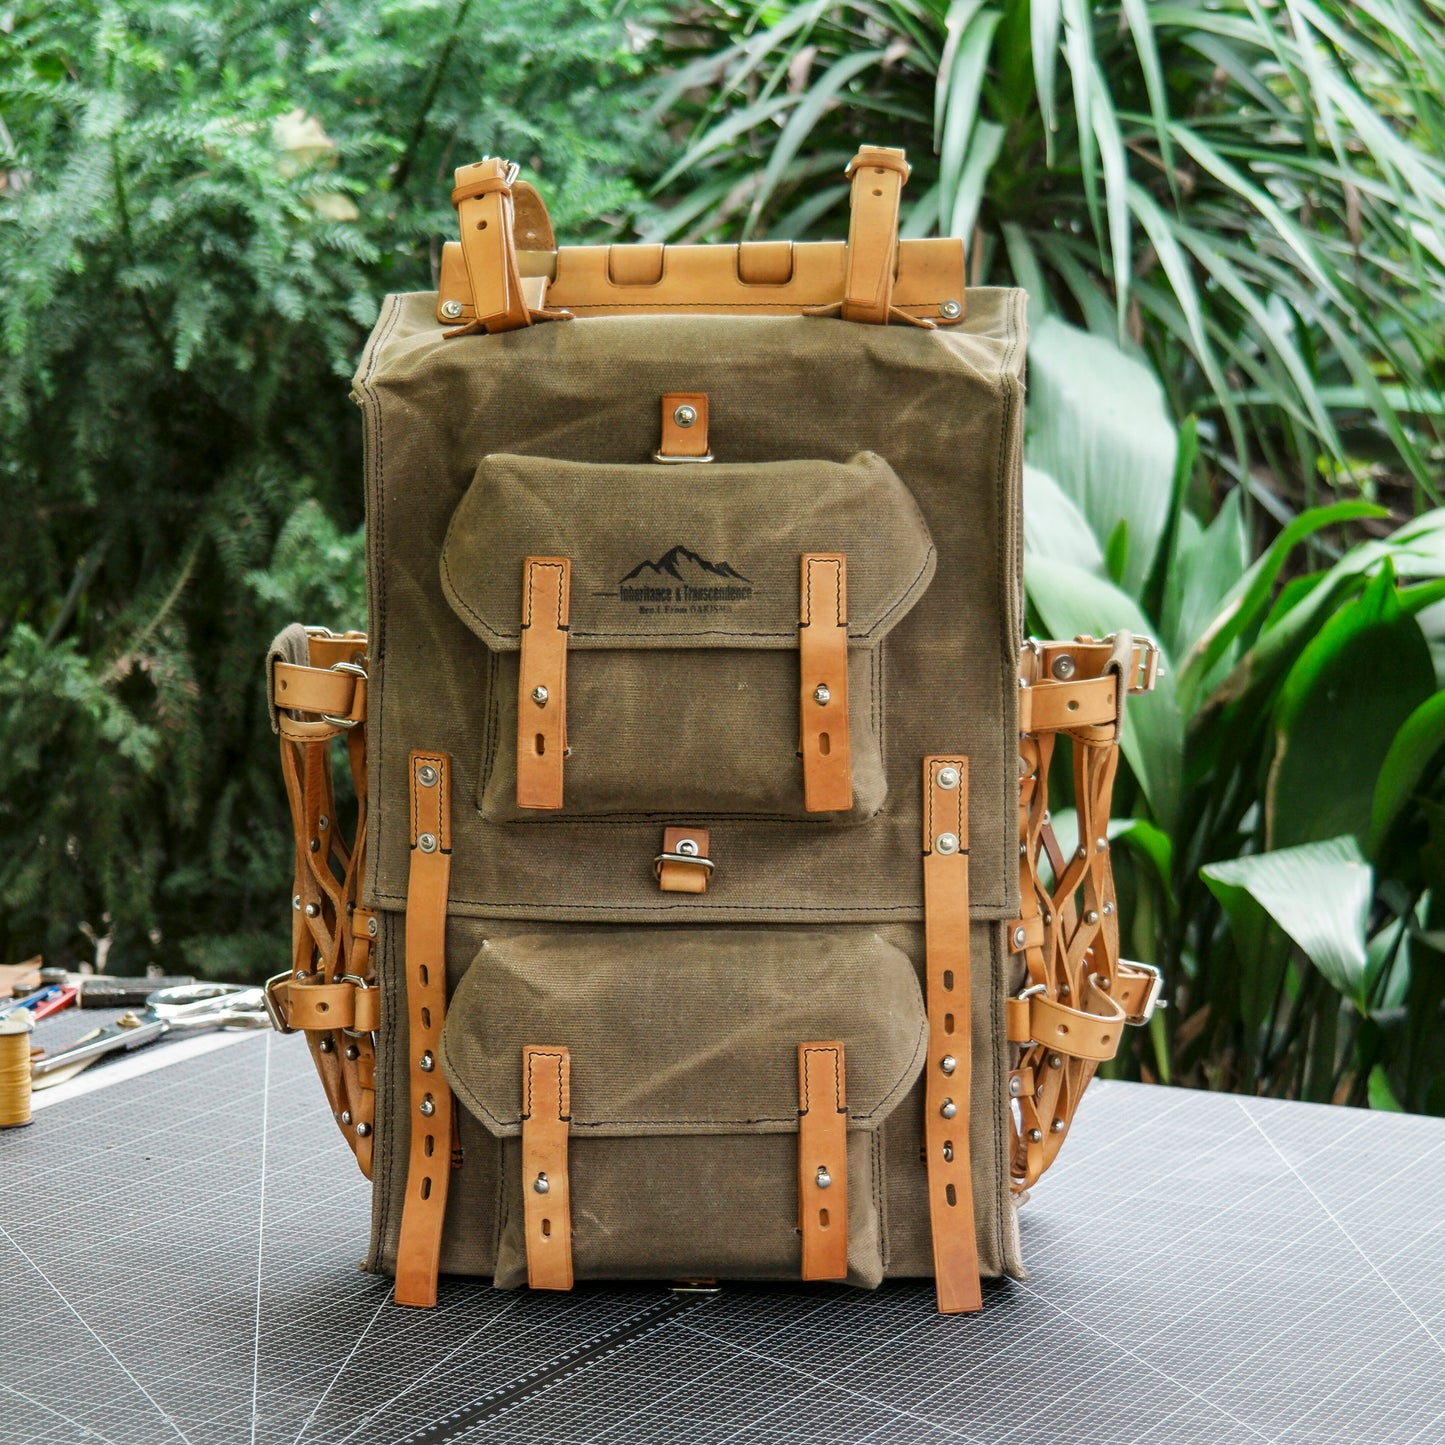 Cotton and linen blended fabric+vegetable tanned leather backpack - retro backpack travel, camping, hiking